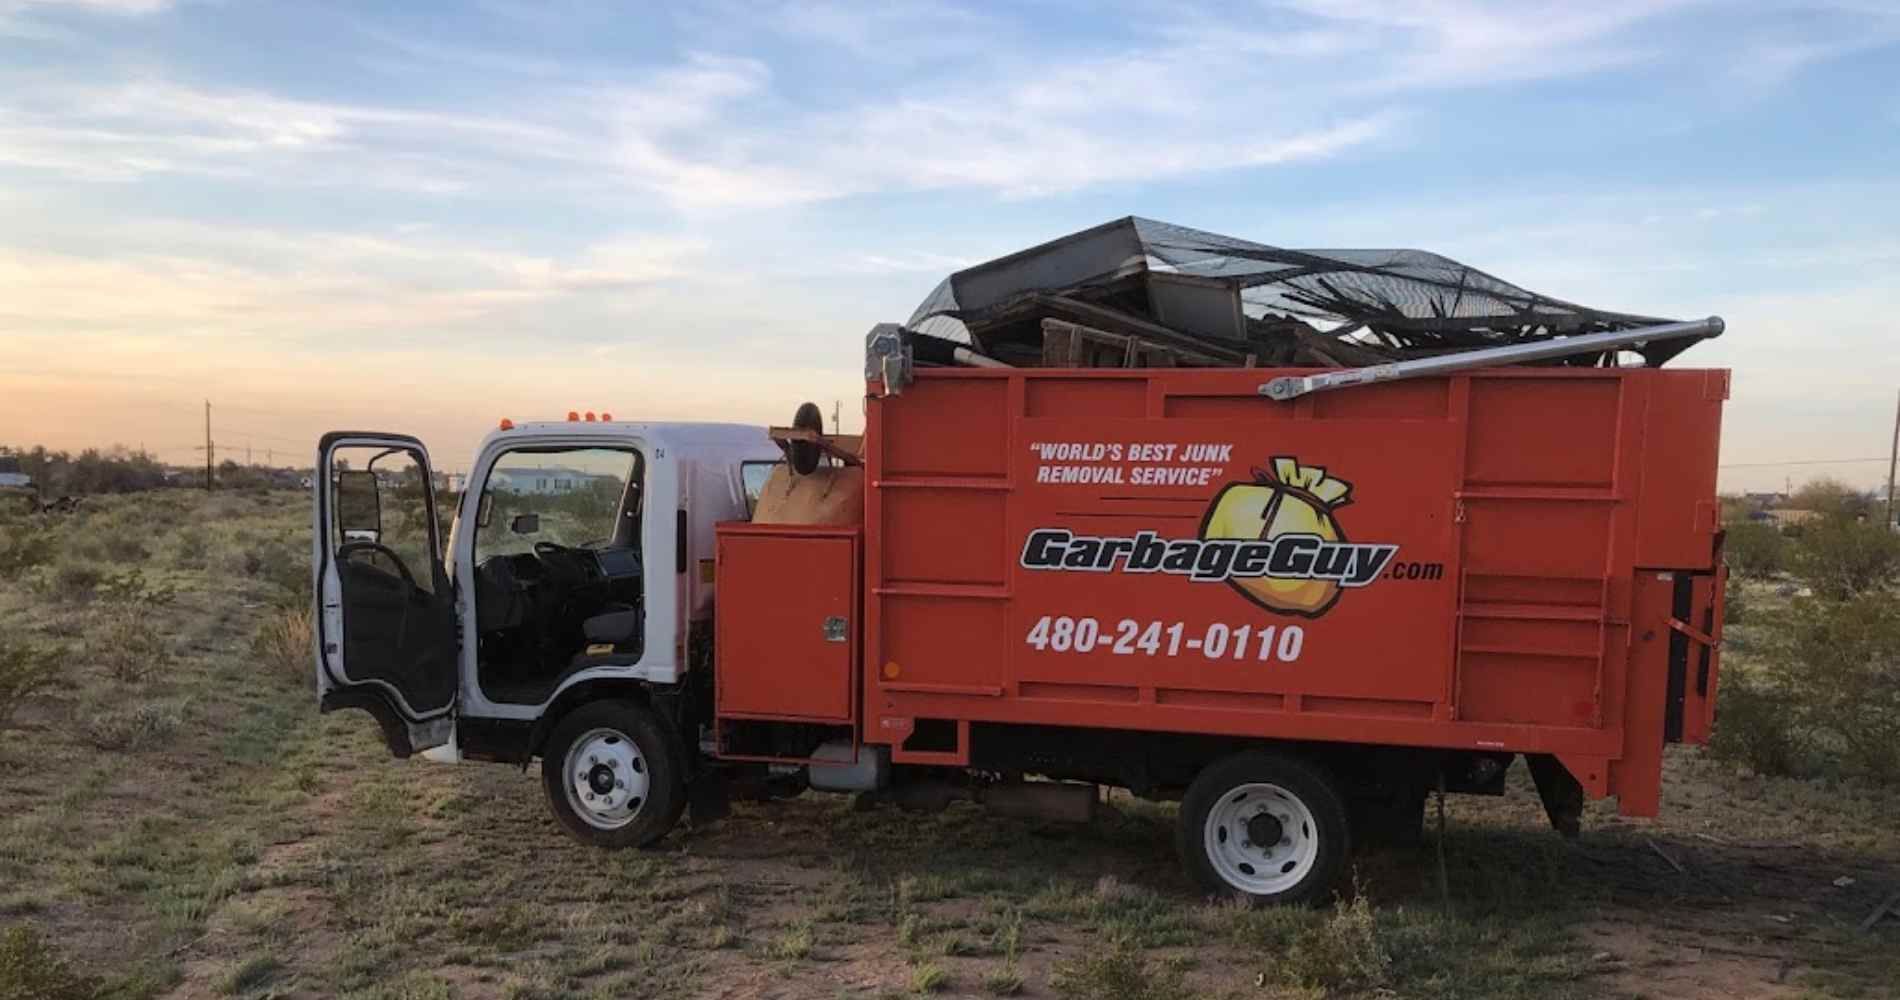 #1 for Junk Removal in Maricopa, AZ with Over 1200 5-Star Reviews!